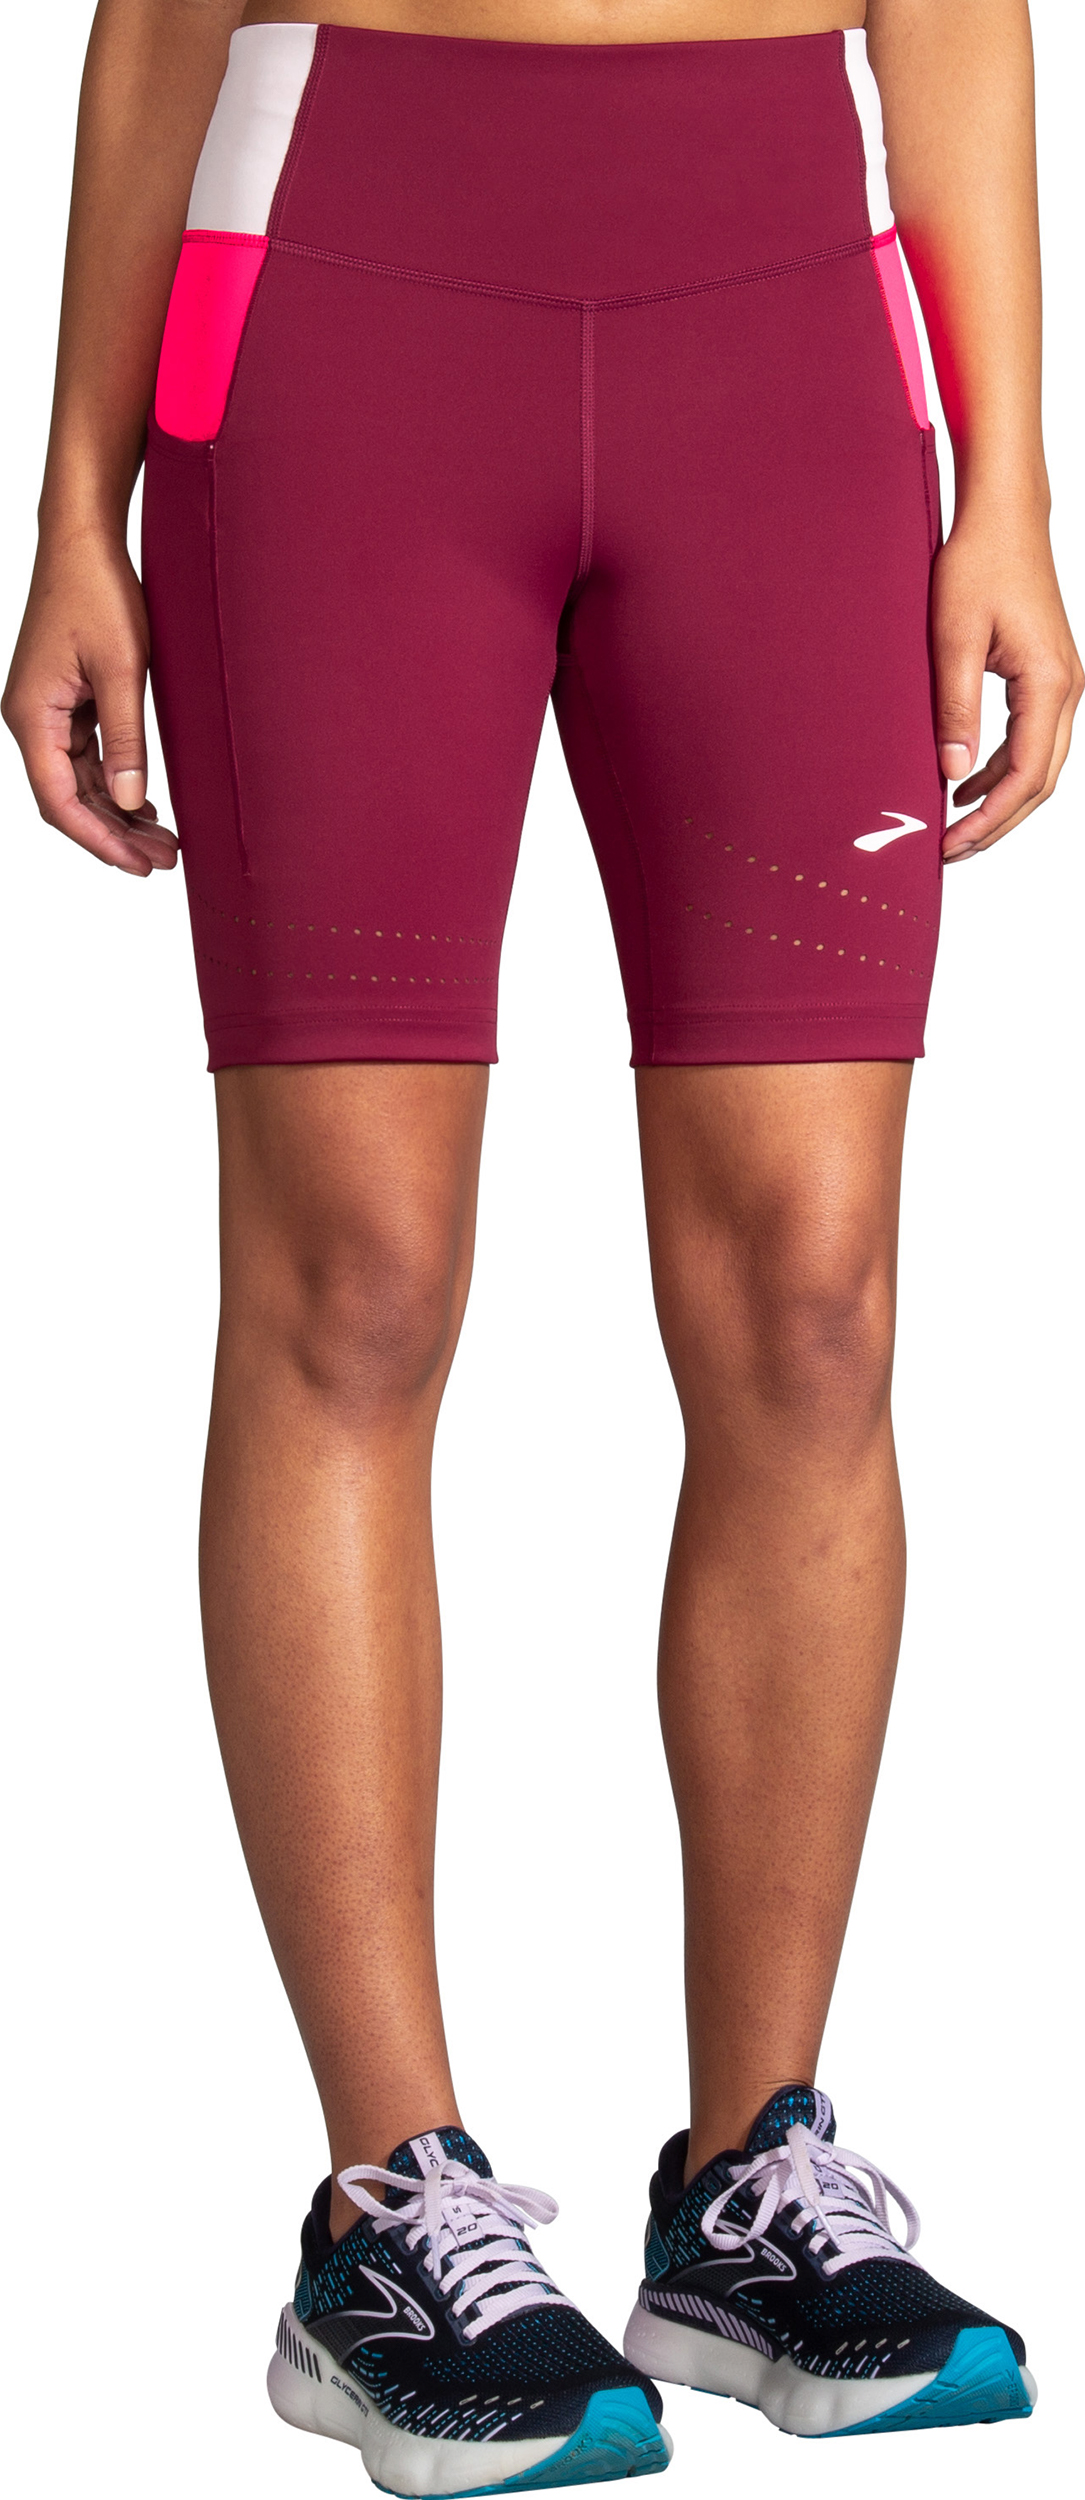 Greenlite Cycling Knickers